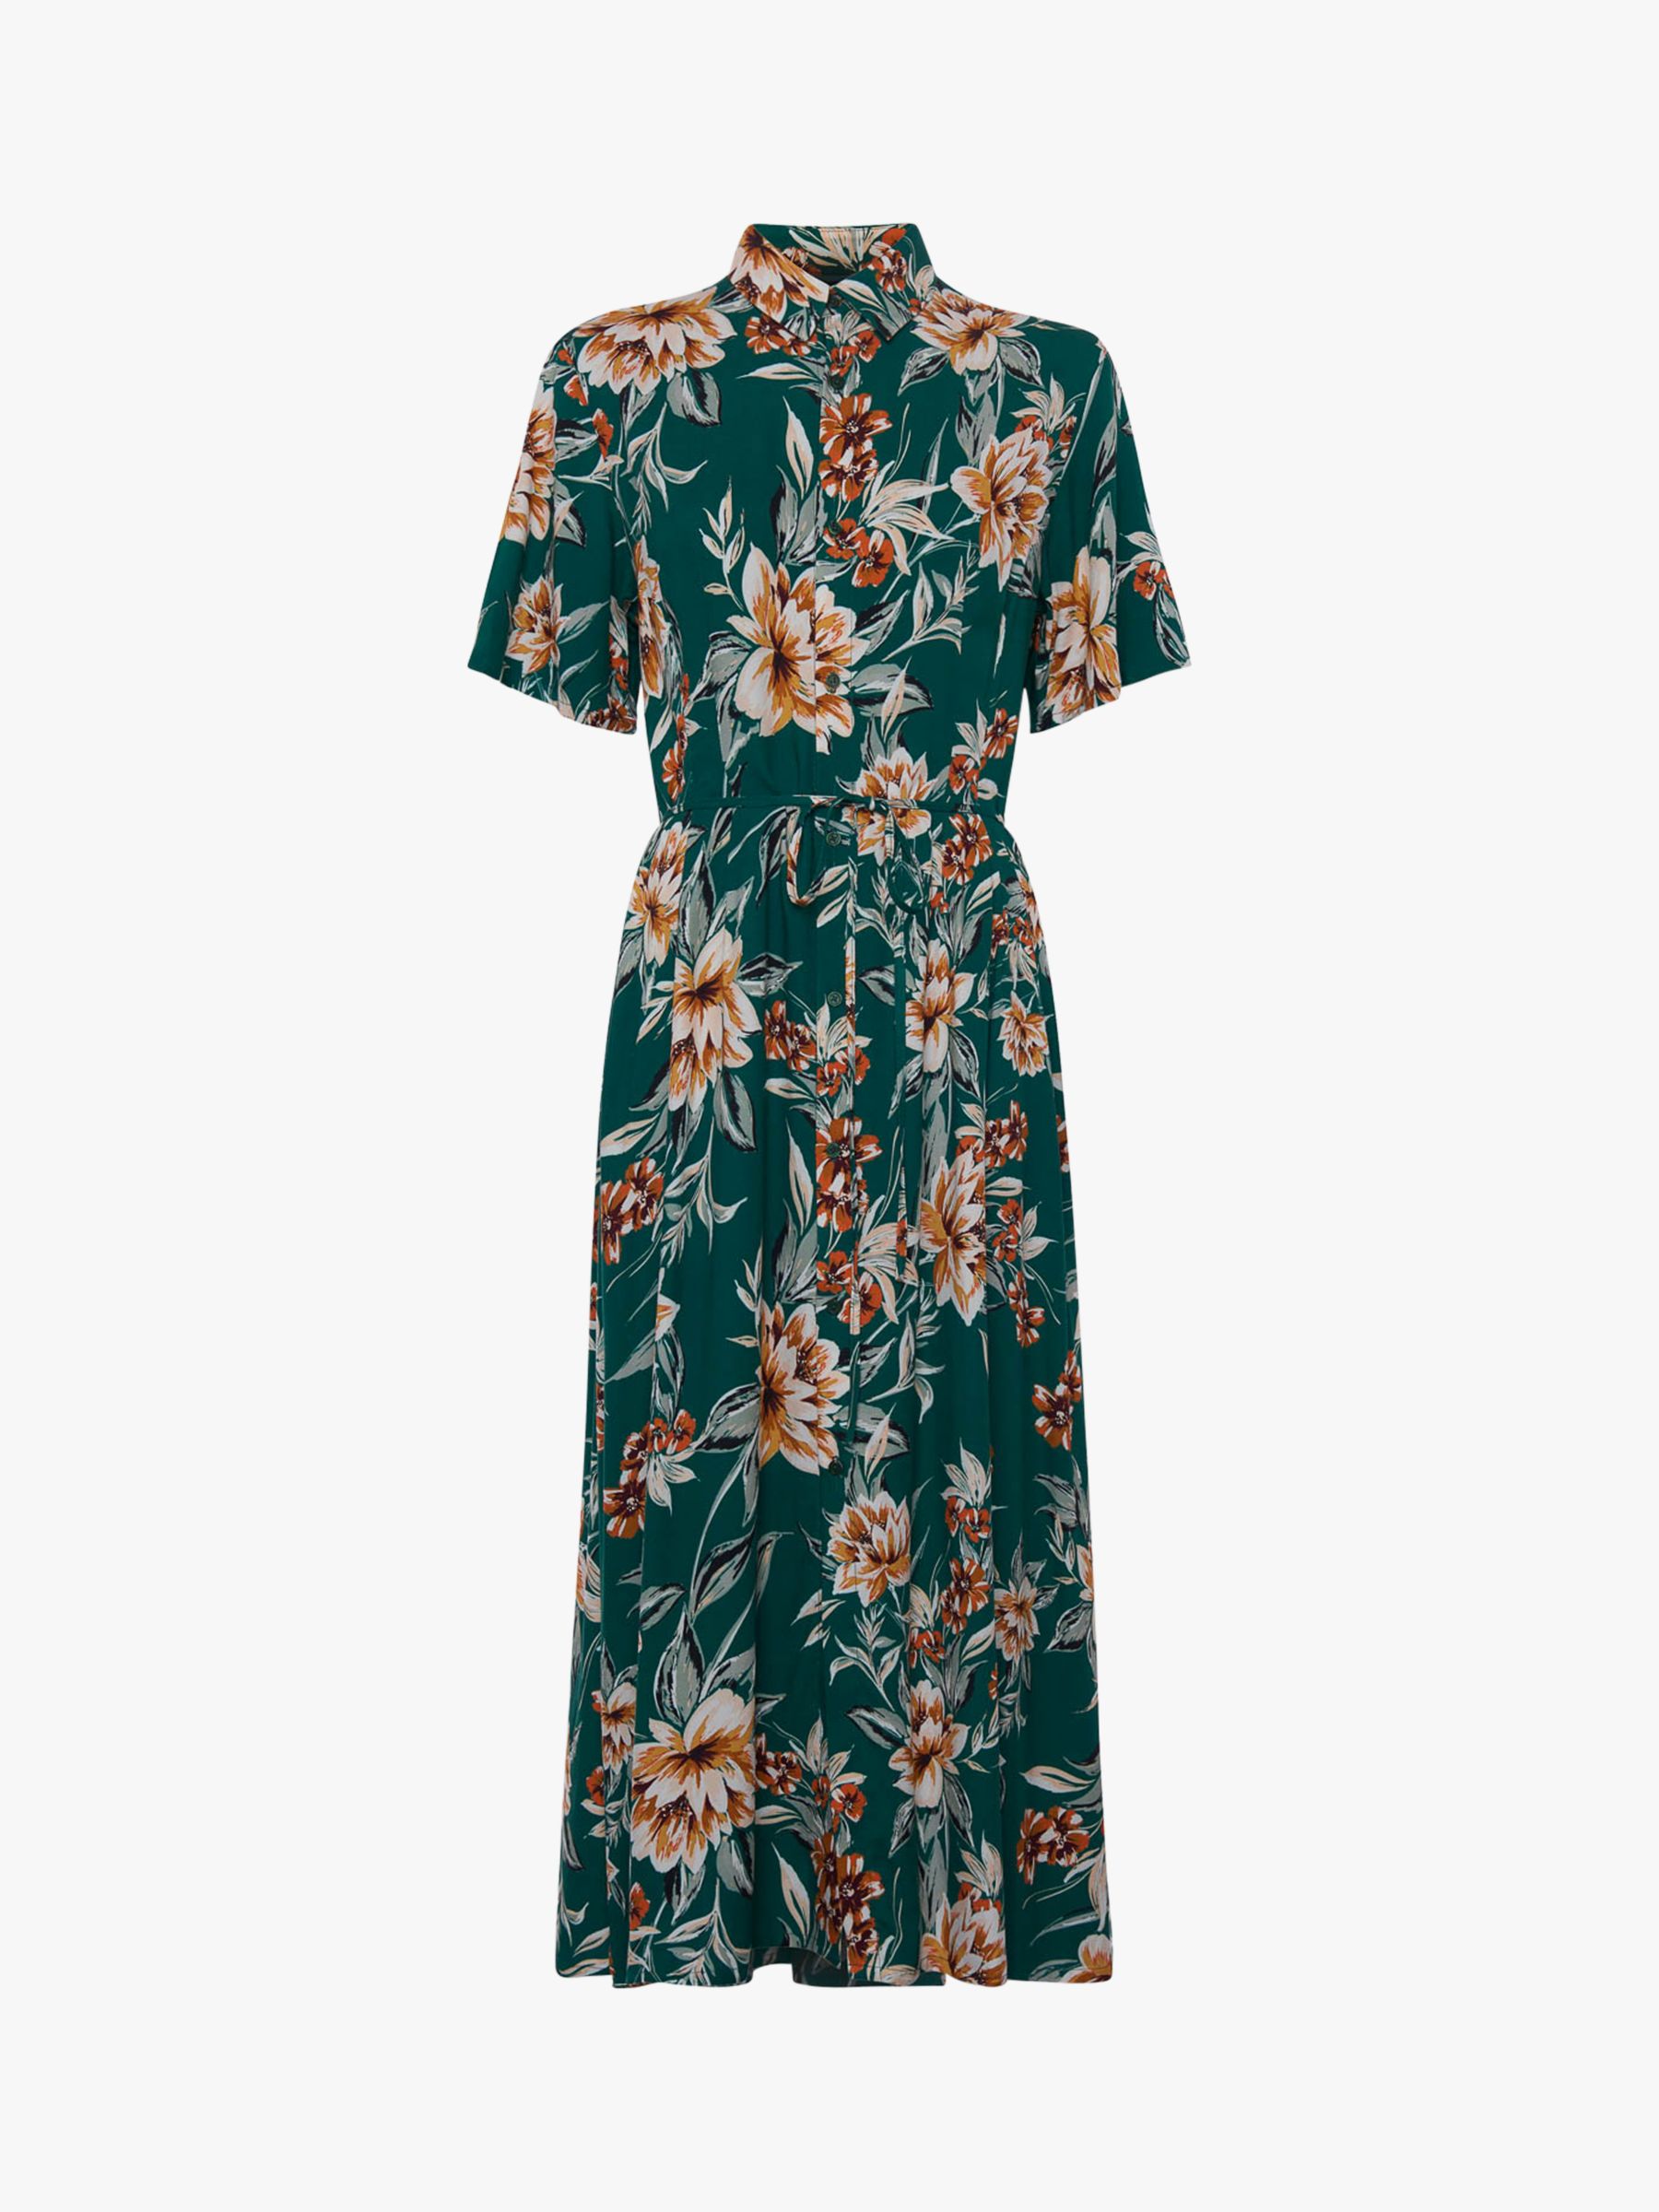 French Connection Claribel Floral Print Midi Dress, Evergreen/Multi